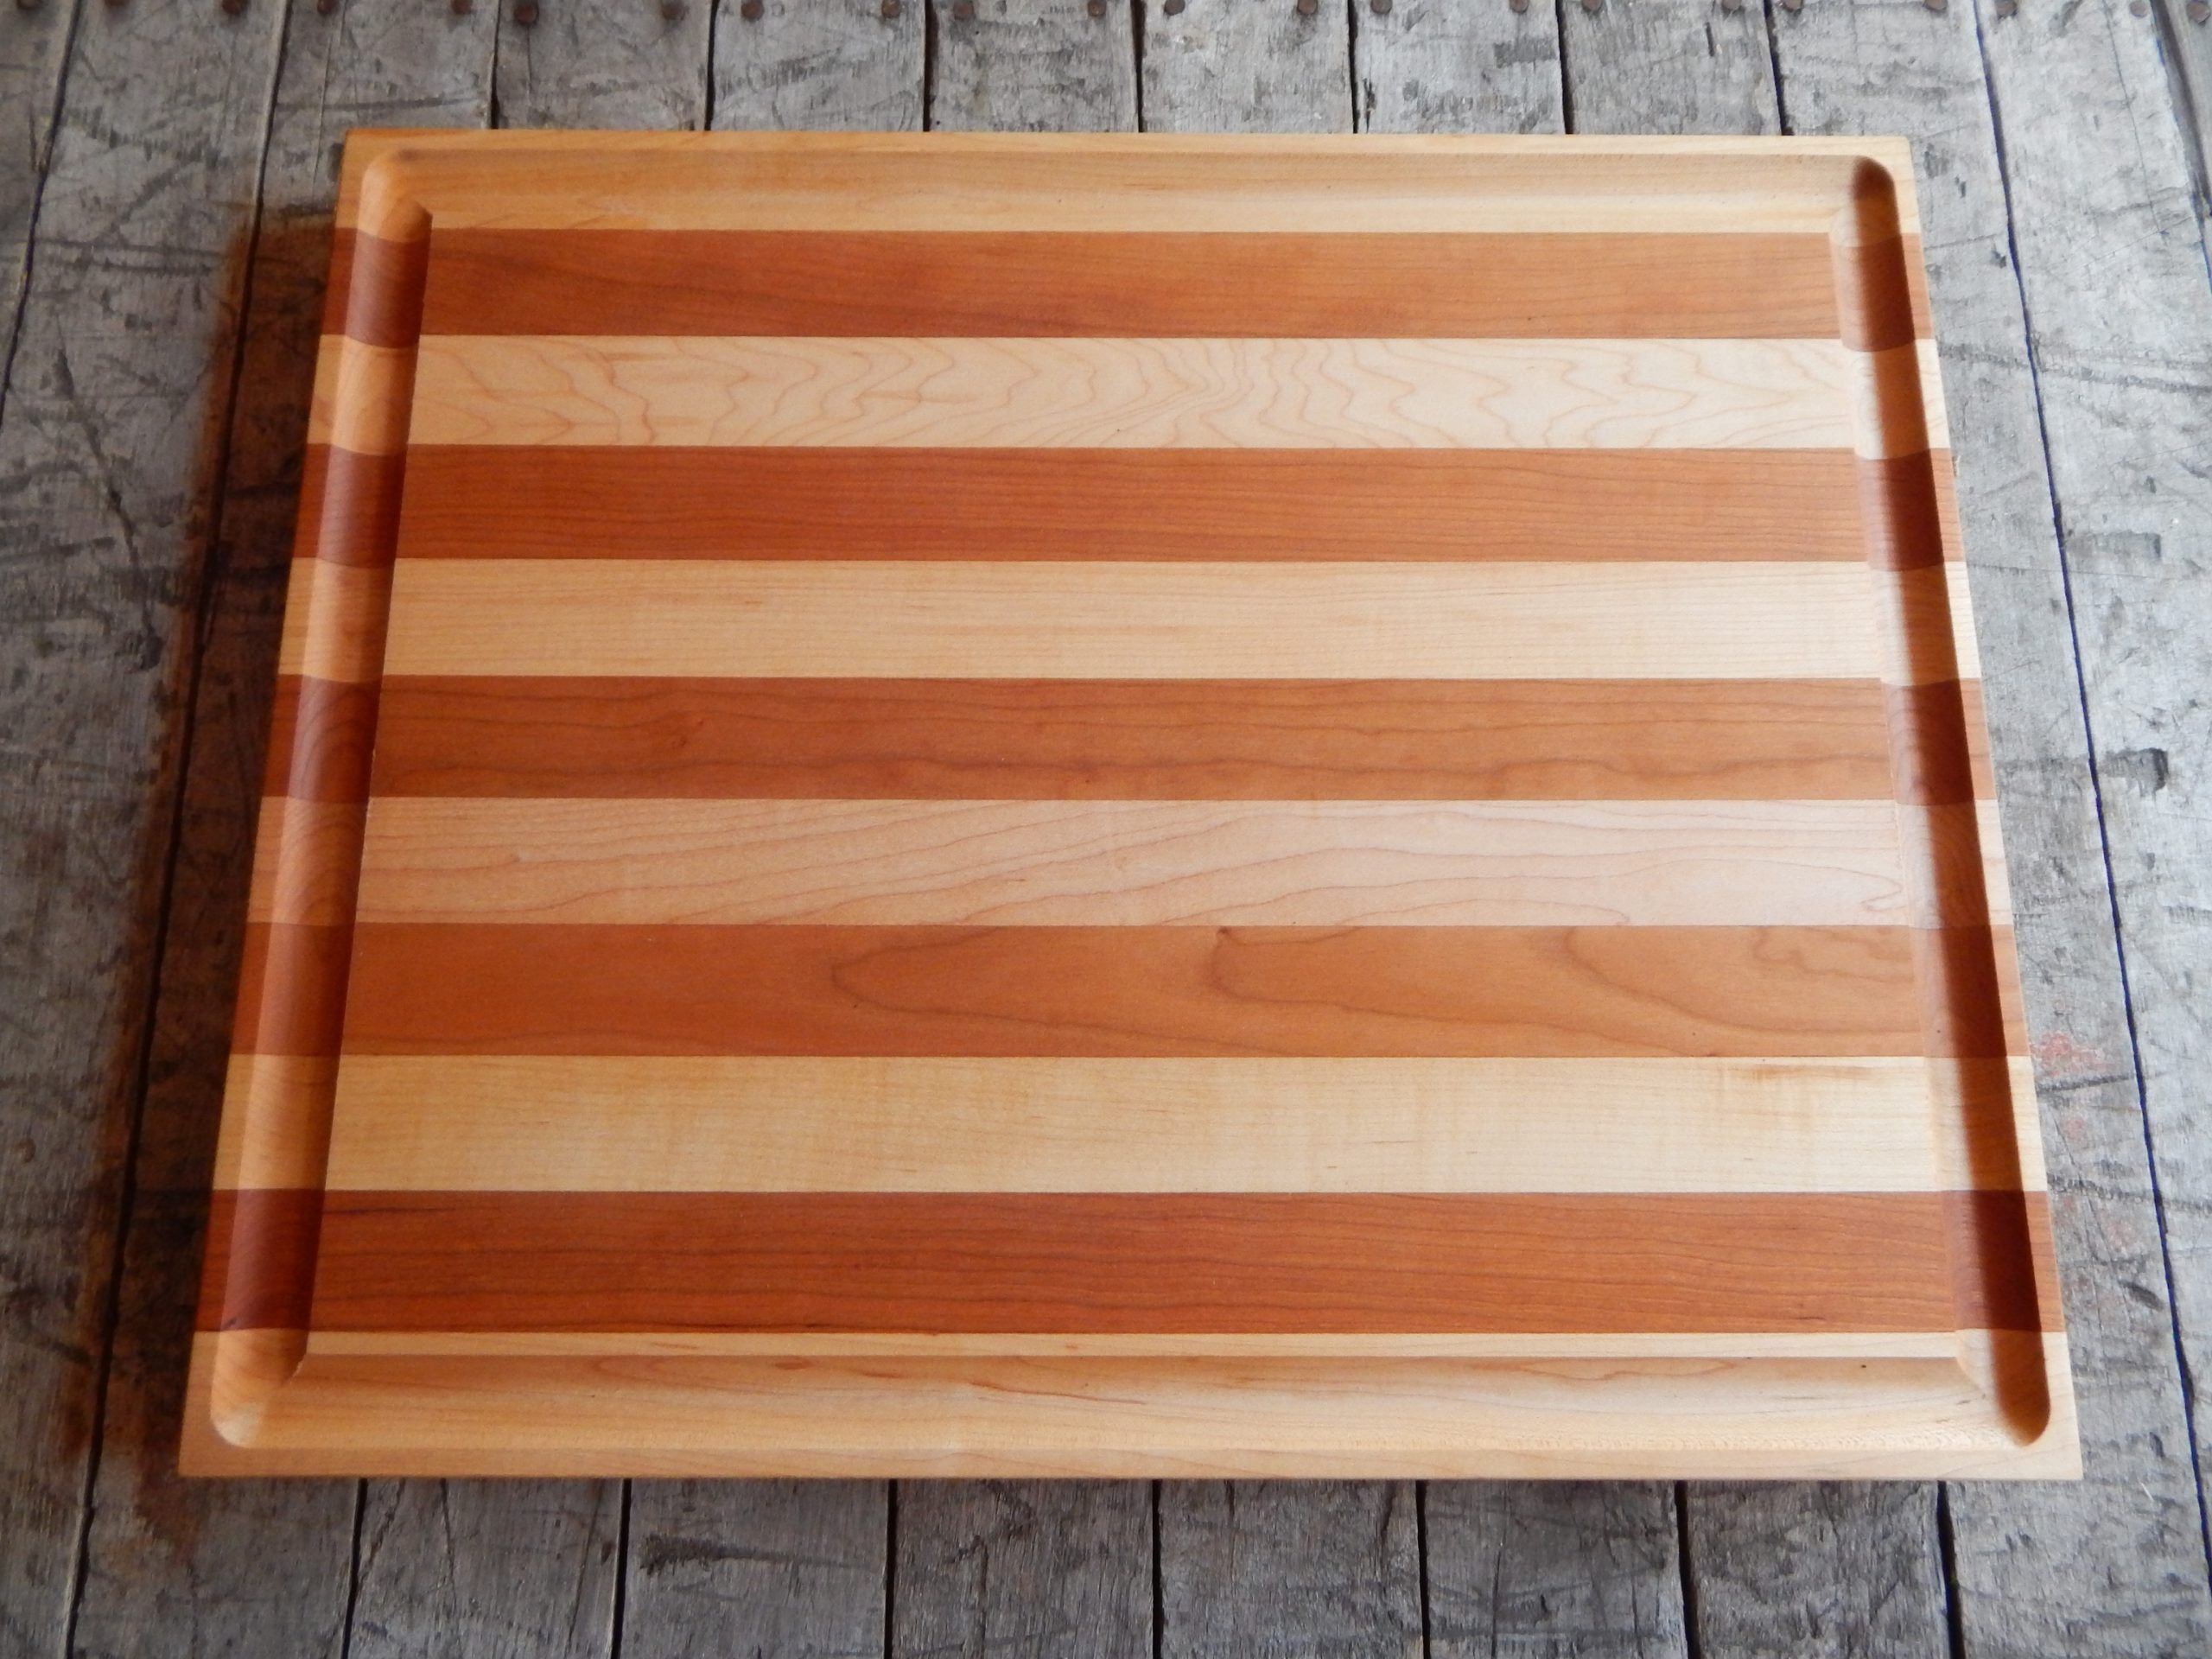 https://www.eastbaycuttingboards.com/wp-content/uploads/2020/09/cherry-maple-trough-scaled.jpg